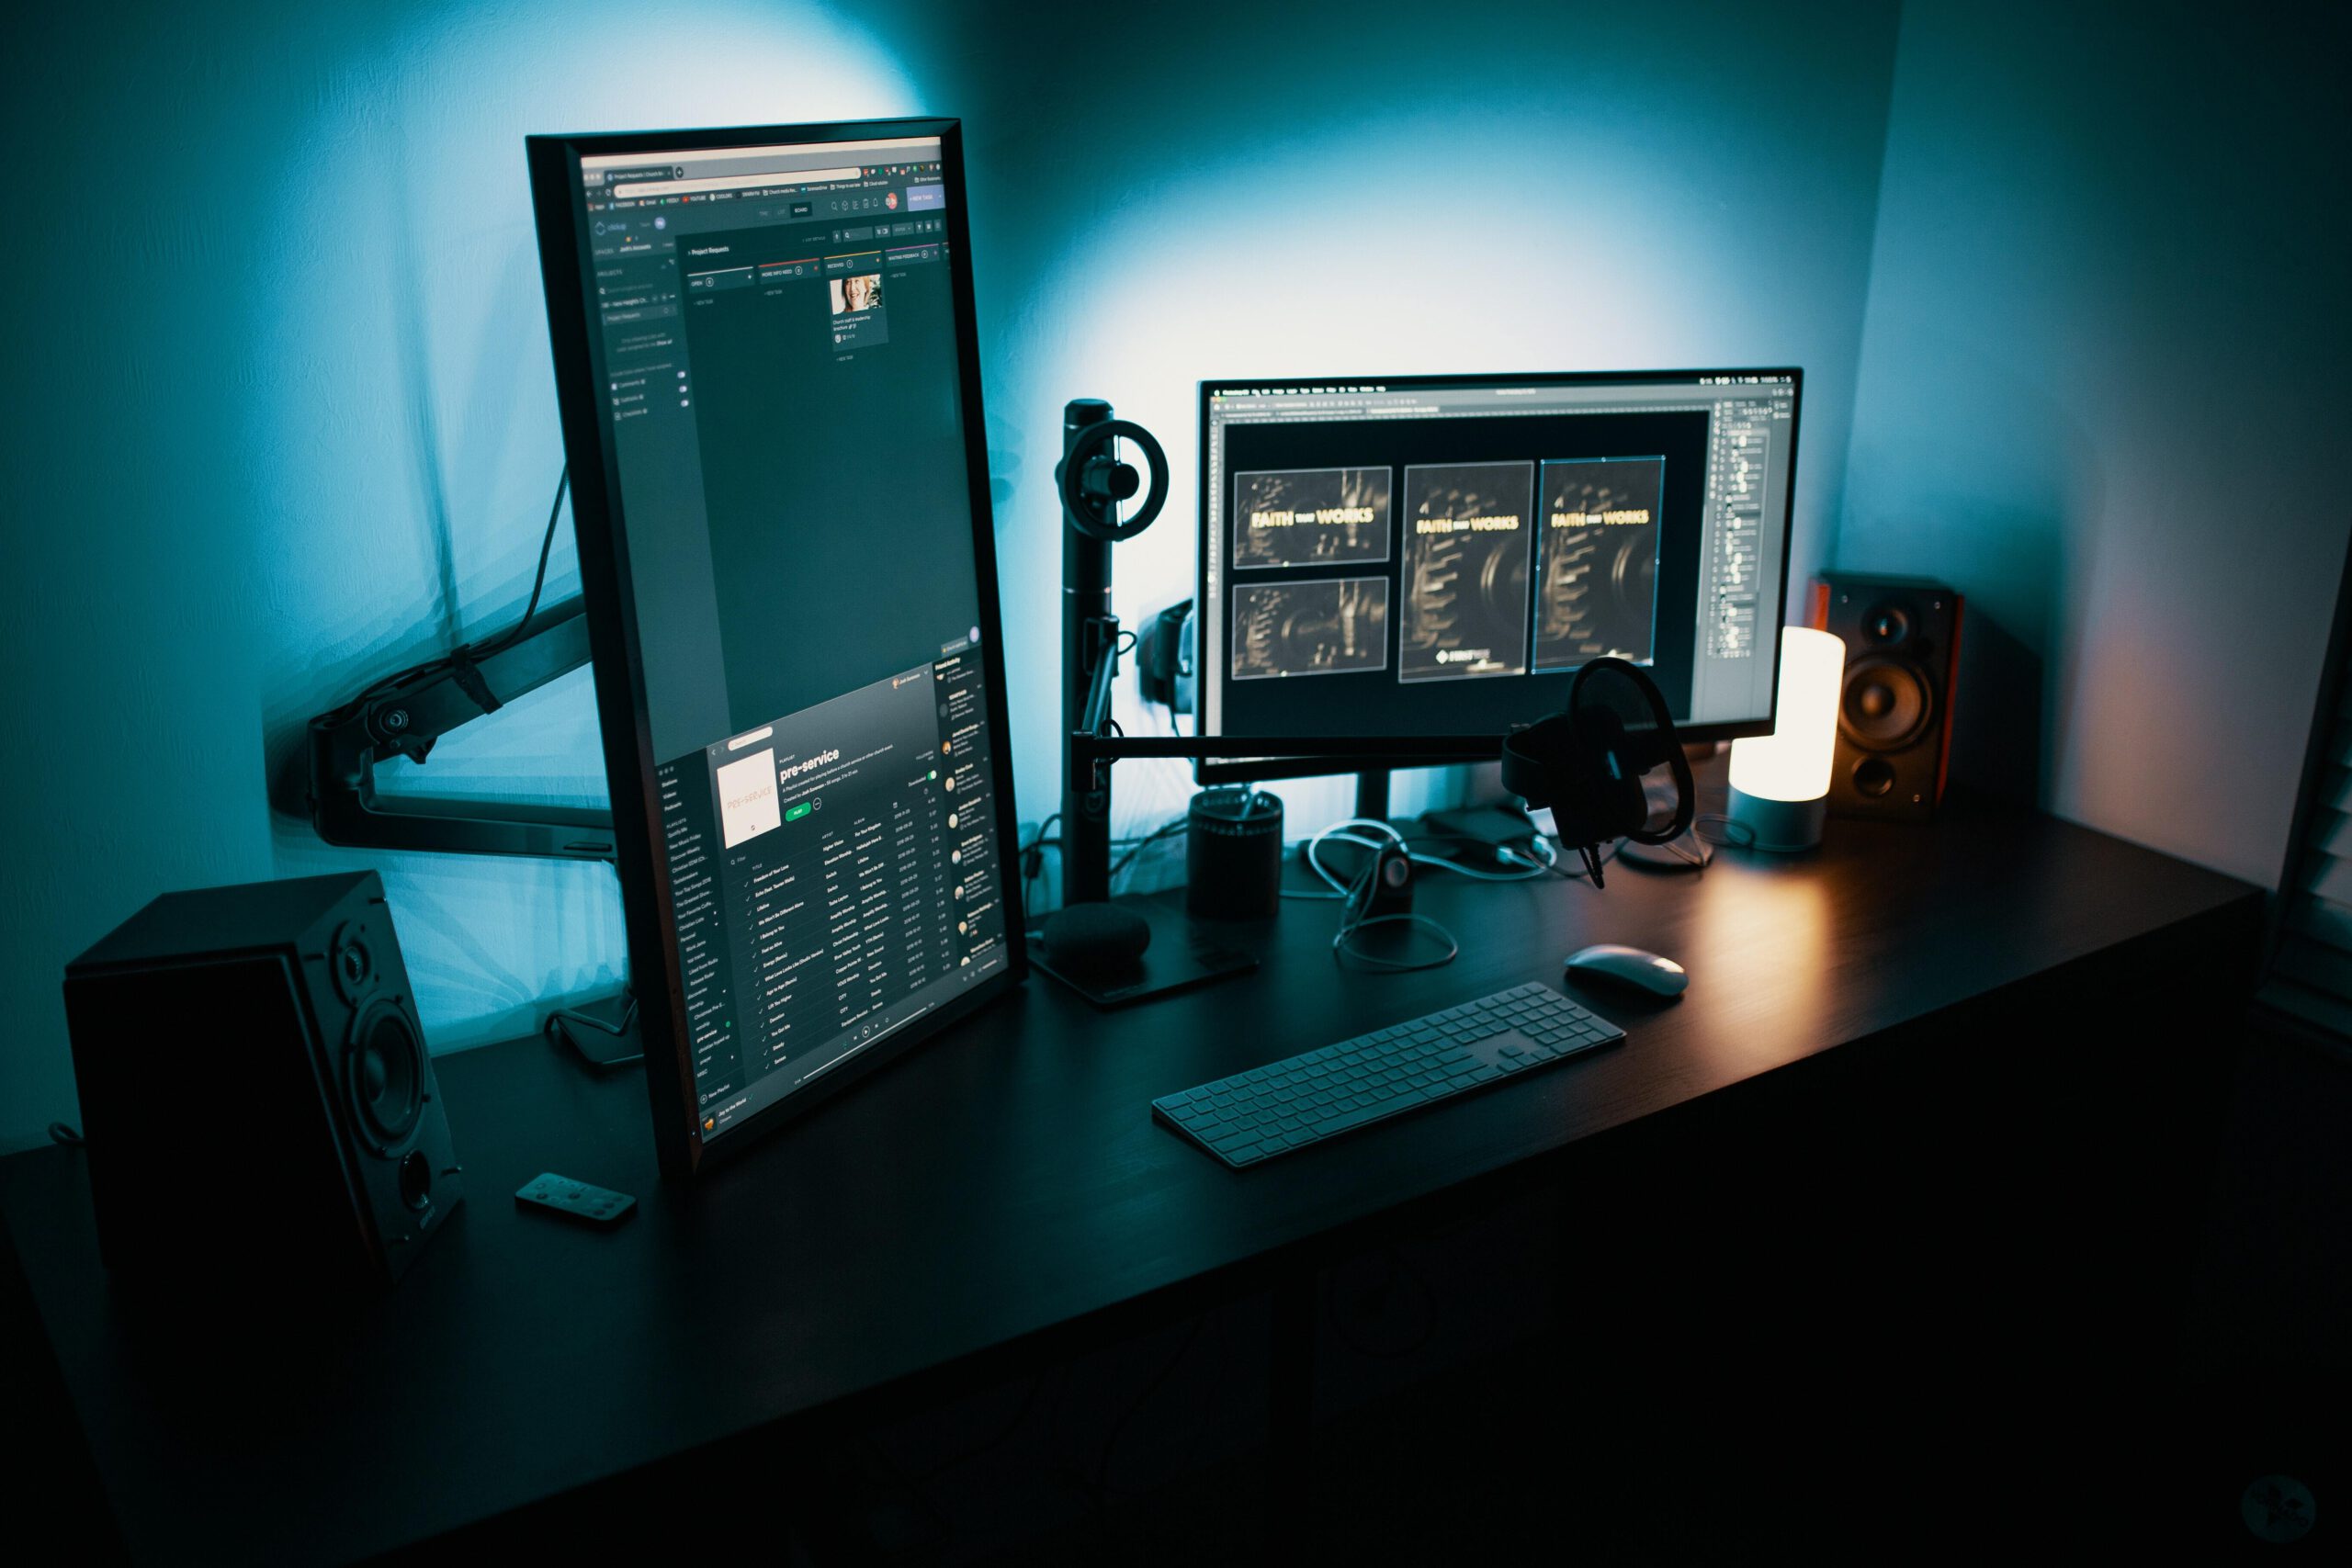 Monitors and PC on desk